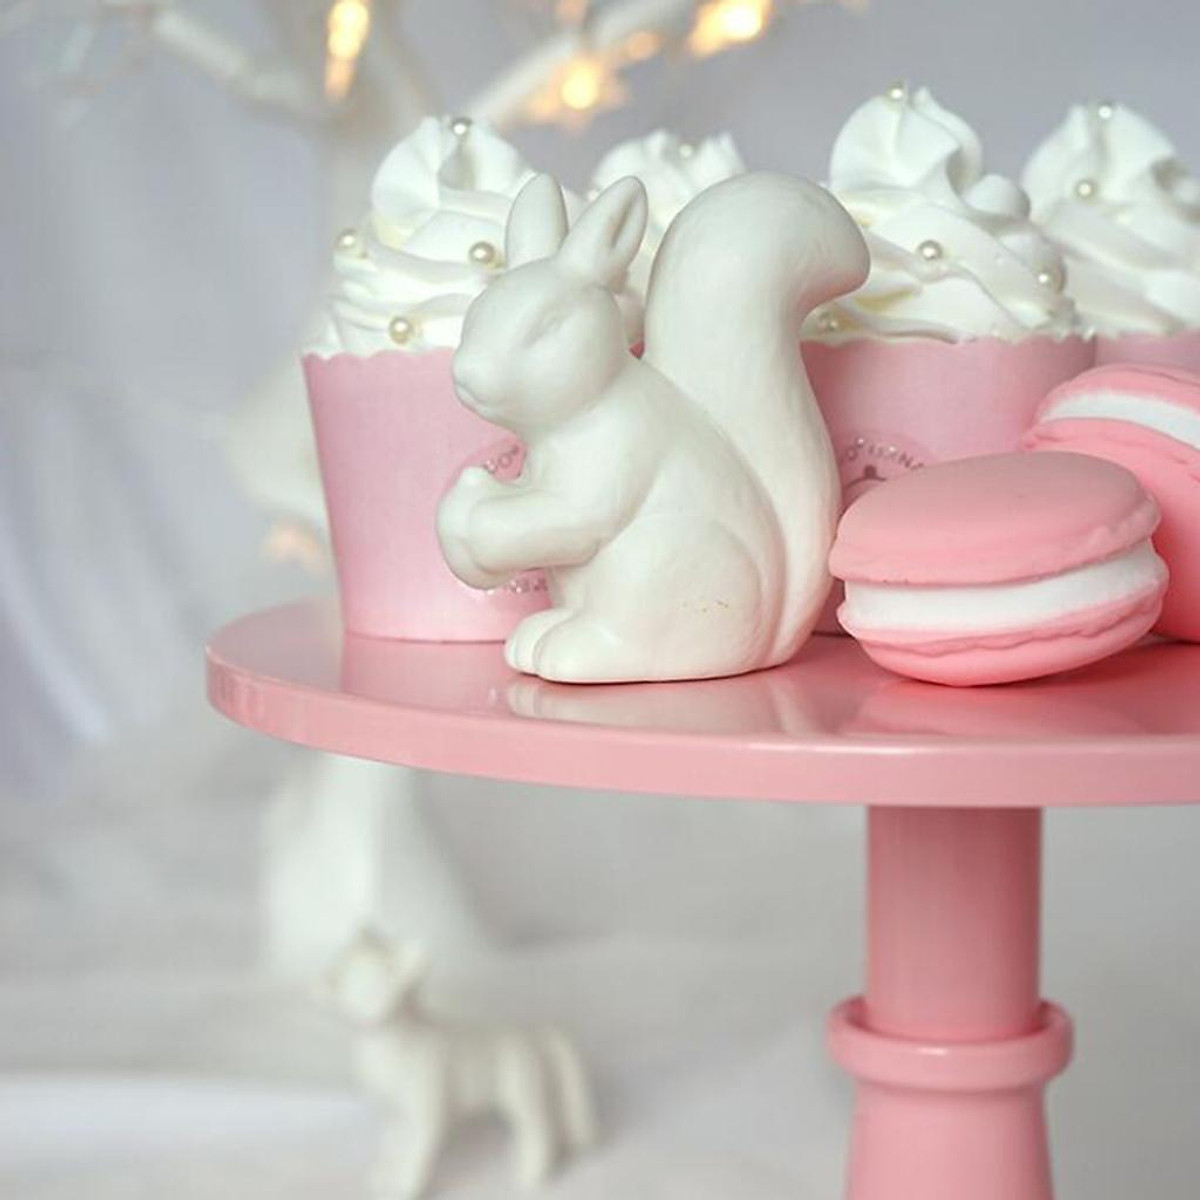 Tall White Cake Stand 12 Inch |Props Rental Singapore Dreamscaper.sg